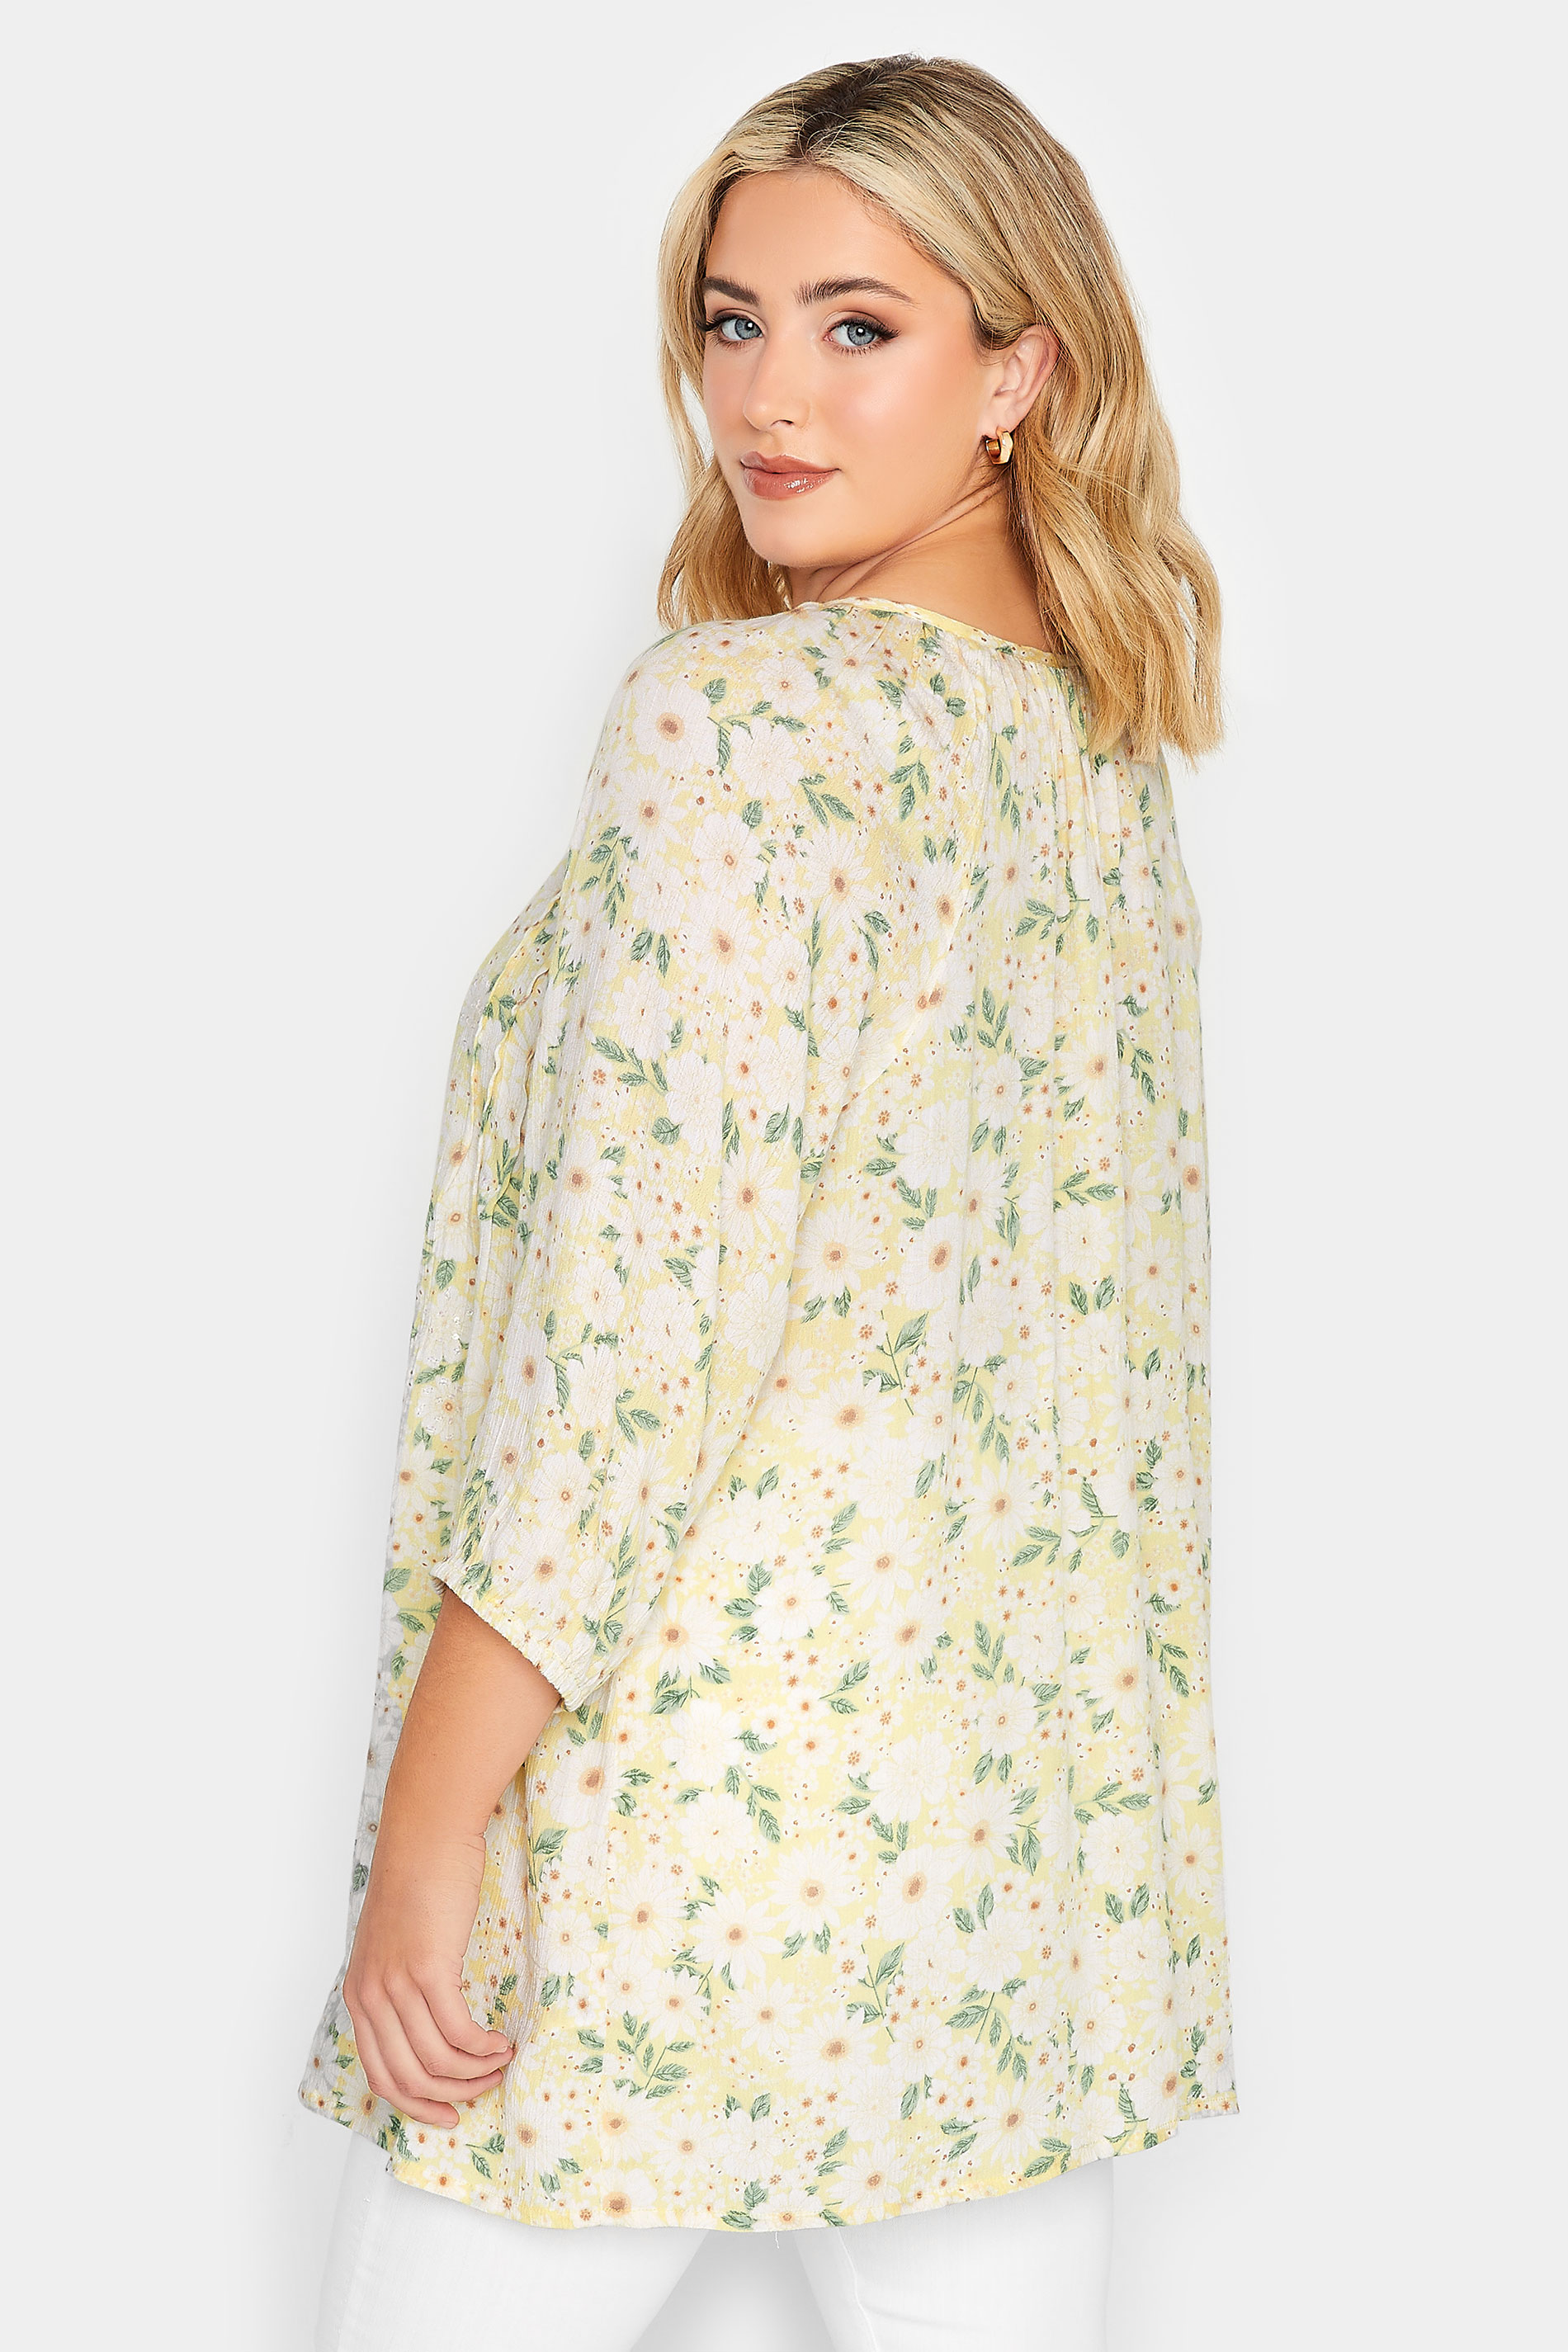 YOURS Curve Plus Size Yellow Floral Tie Neck Top | Yours Clothing  3